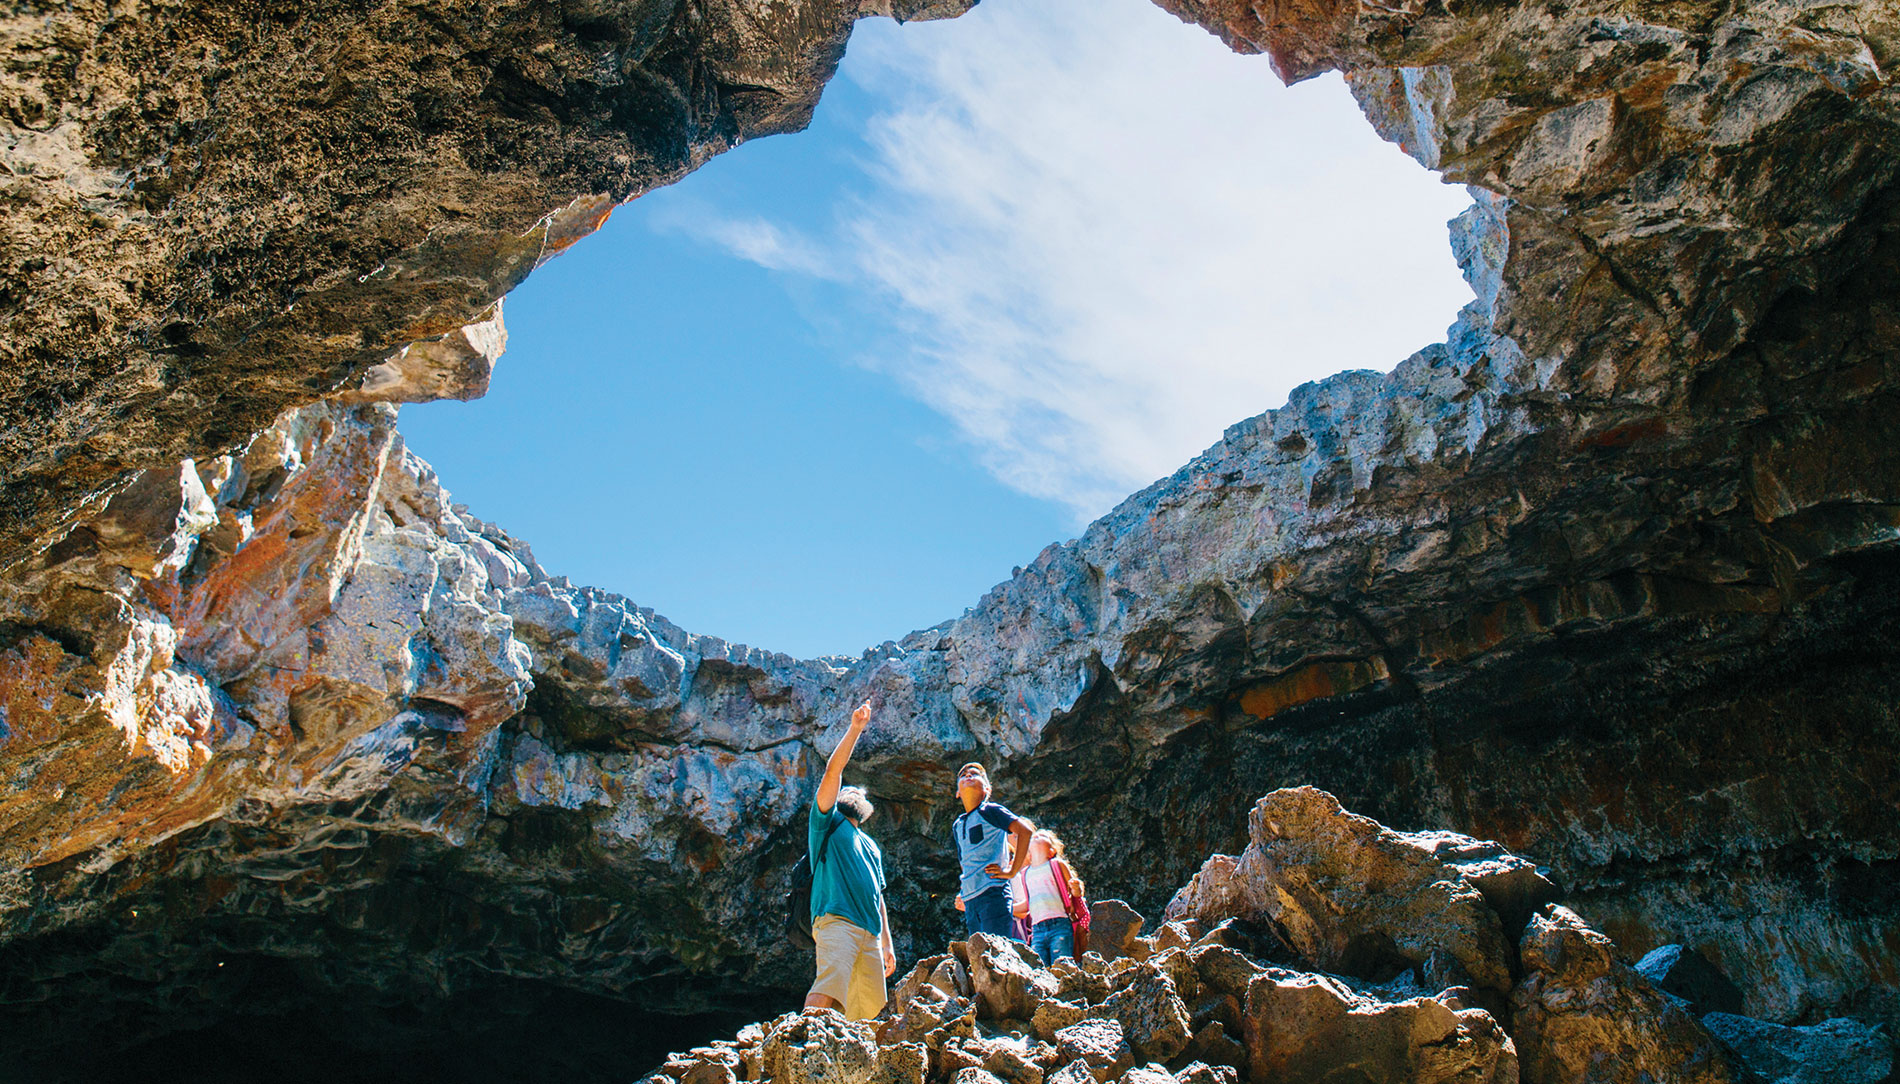 A family explores a cave at Craters of the Moon National Monument and Preserve